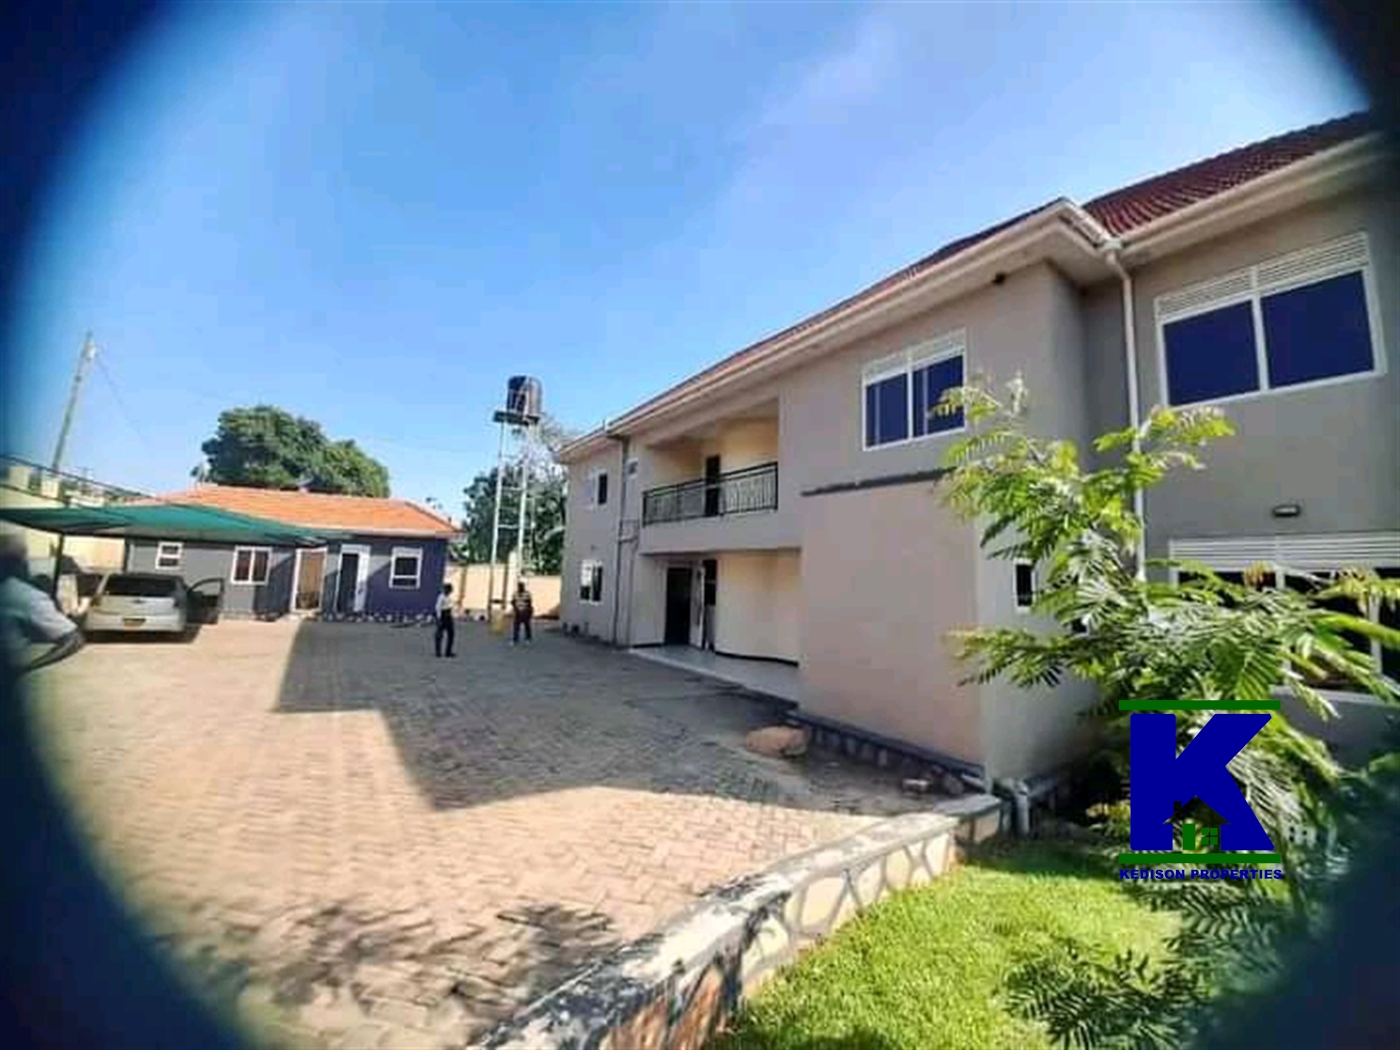 Mansion for rent in Lubowa Kampala